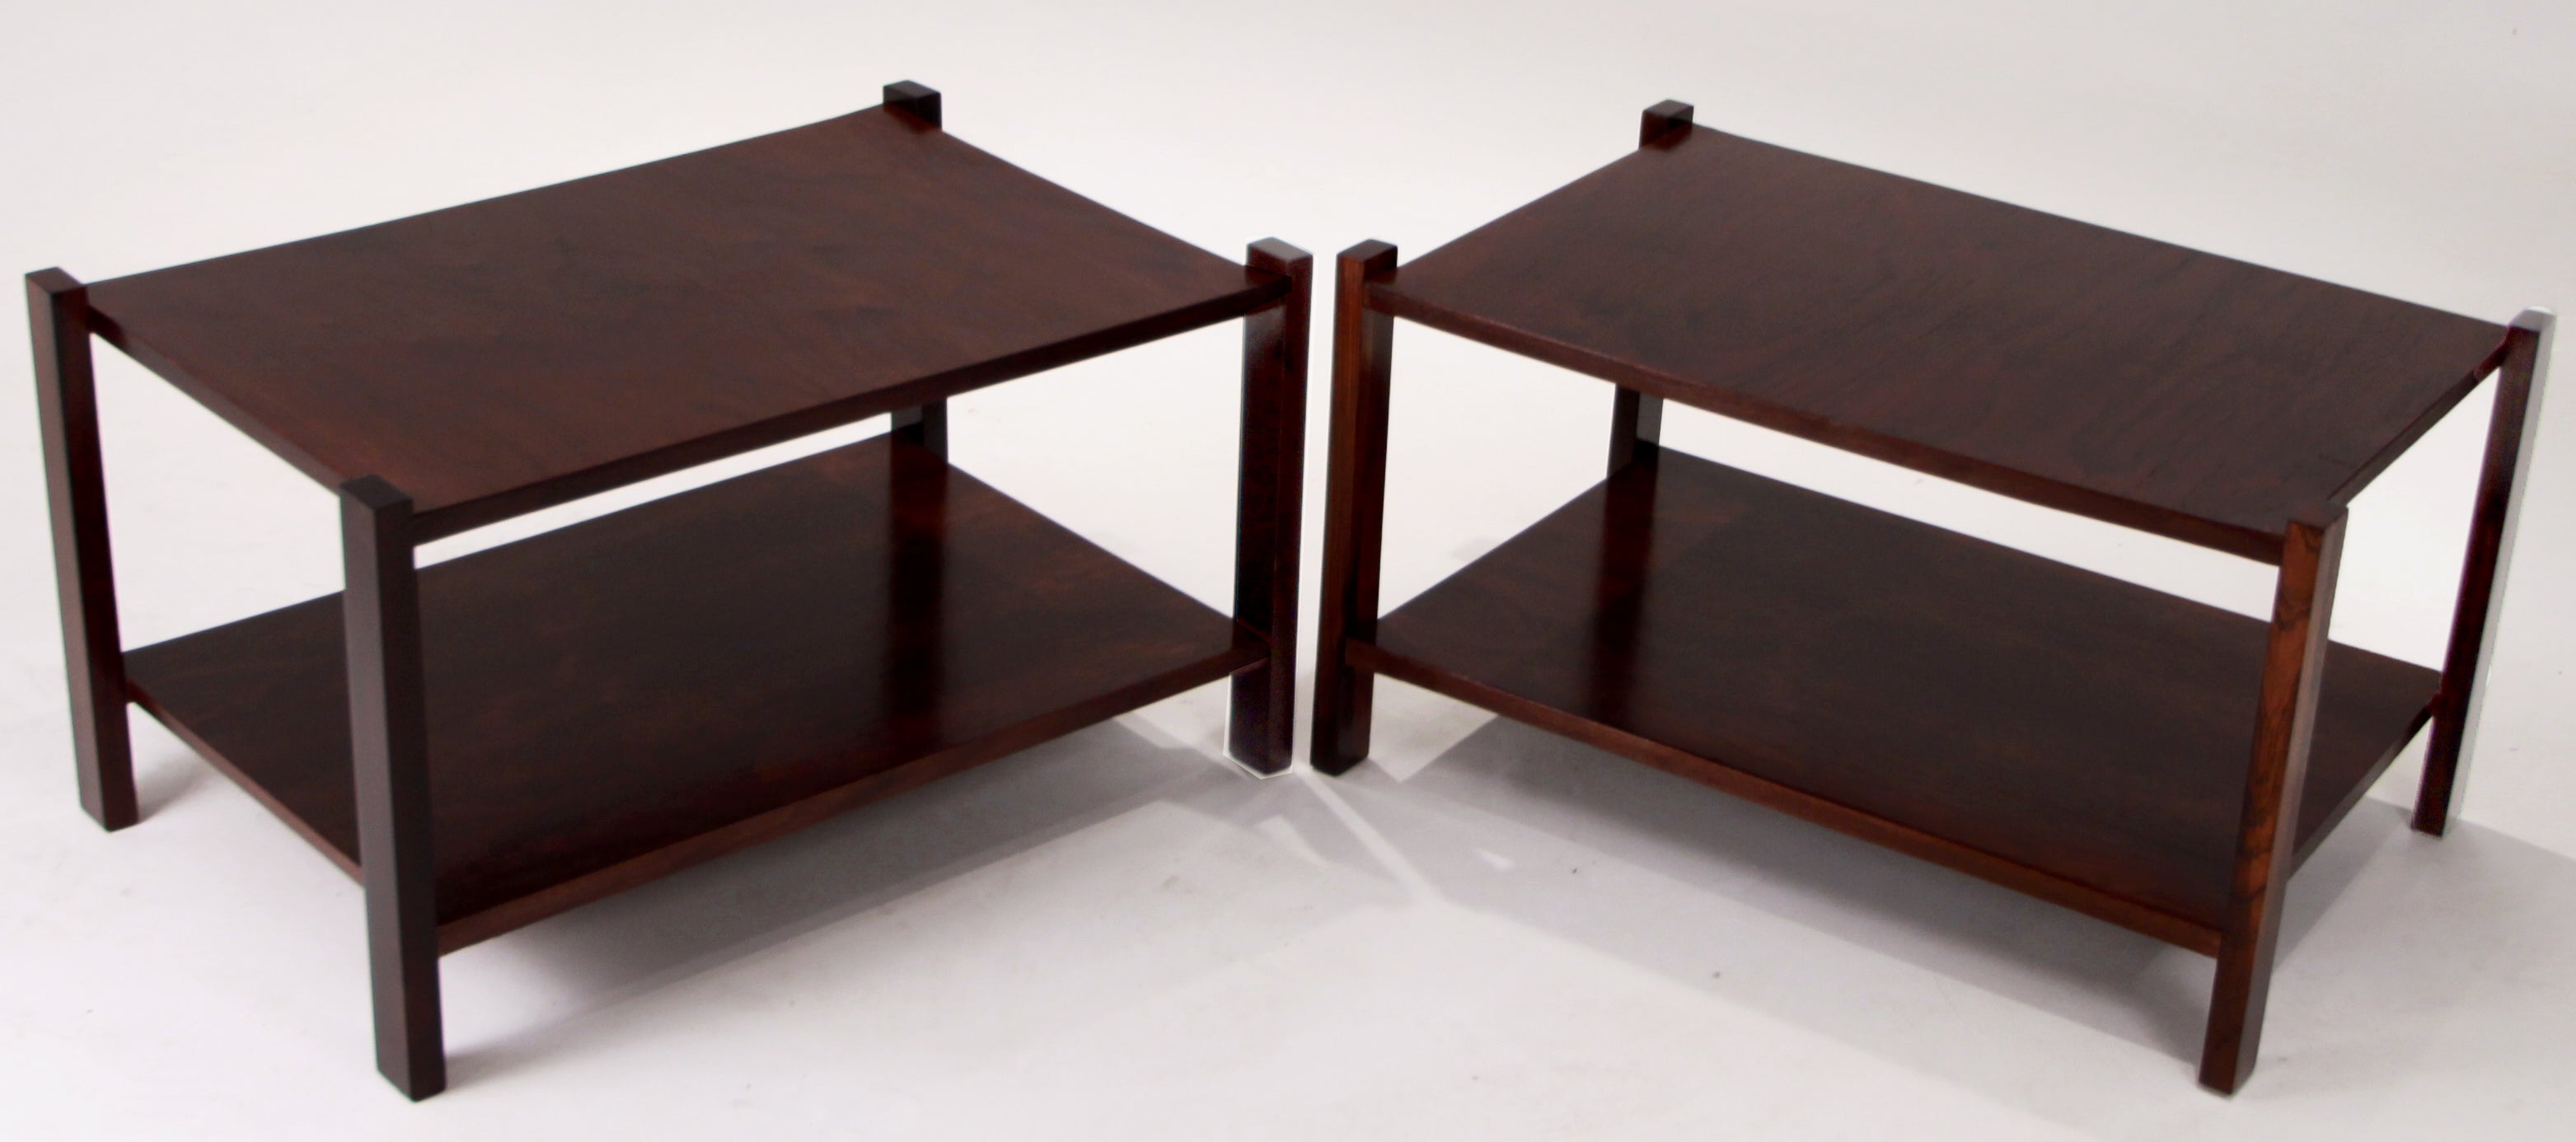 Organic Modern Brazilian Rosewood Side Tables by Celina For Sale